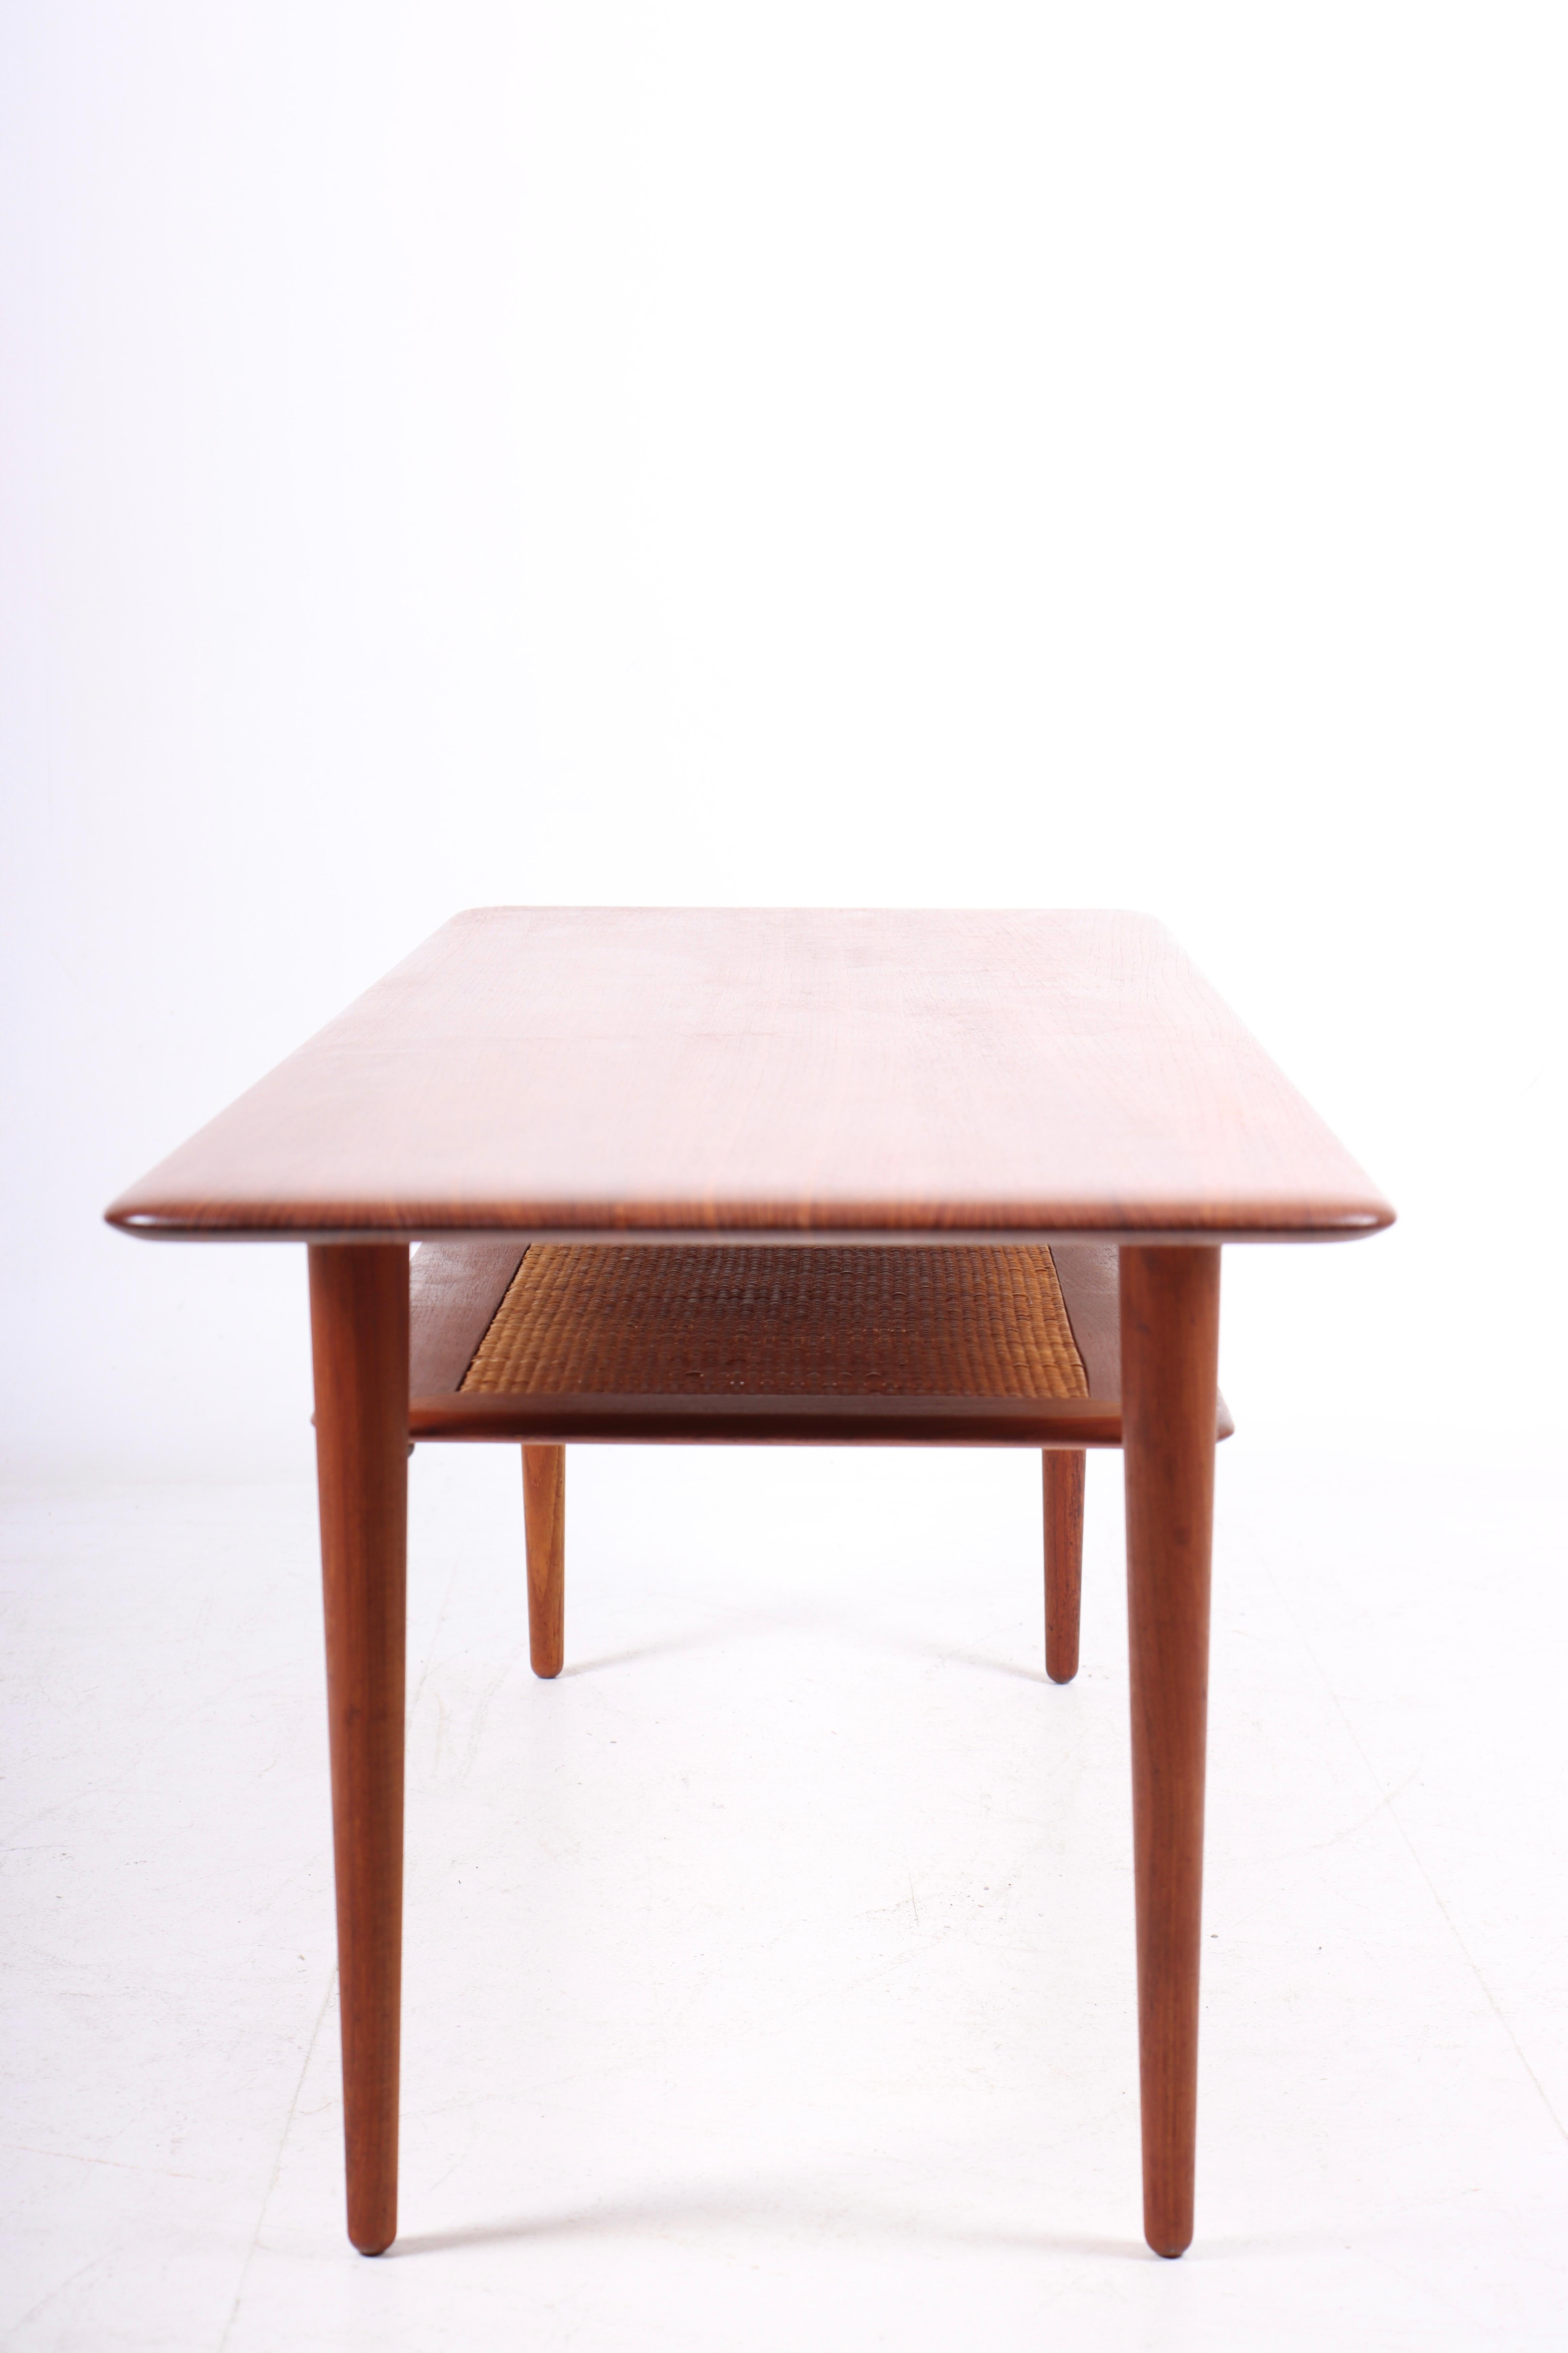 Midcentury Low Table in Solid Teak and Cane by Hvidt & Mølgaard, Made in Denmark In Good Condition For Sale In Lejre, DK